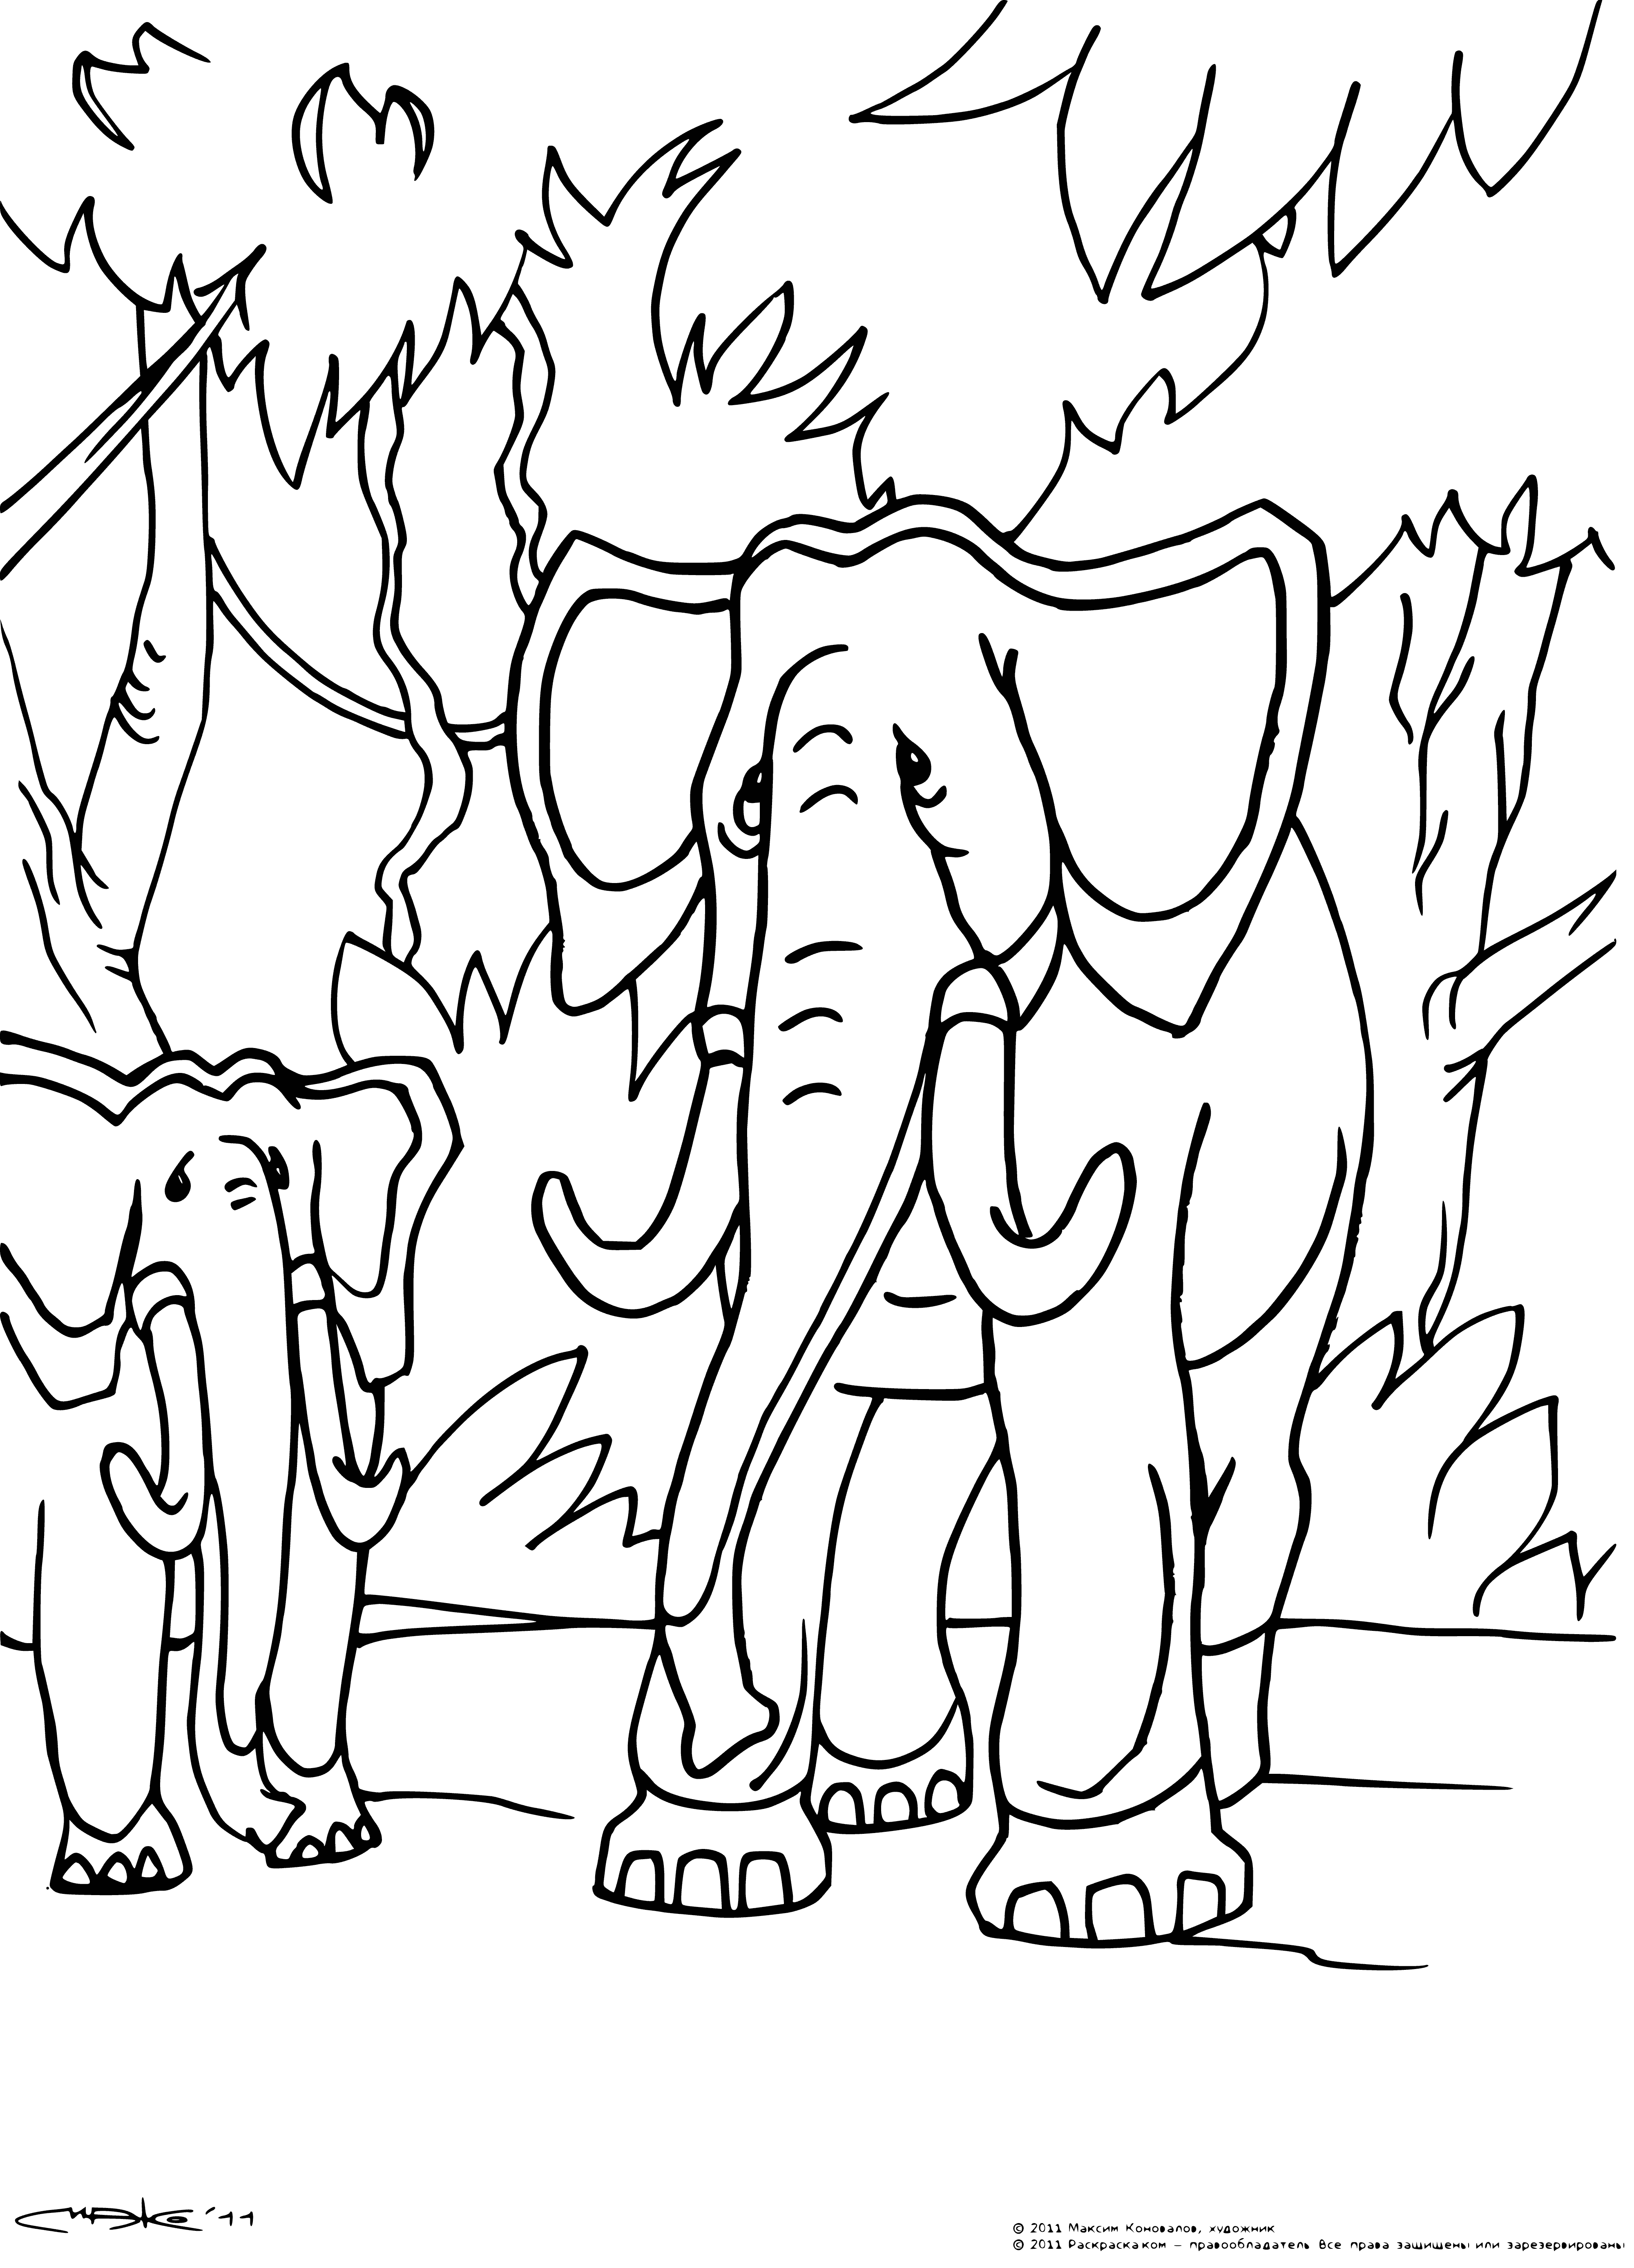 coloring page: 4 elephants around tree, 2 trunks up, 1 spraying water, 1 watching.